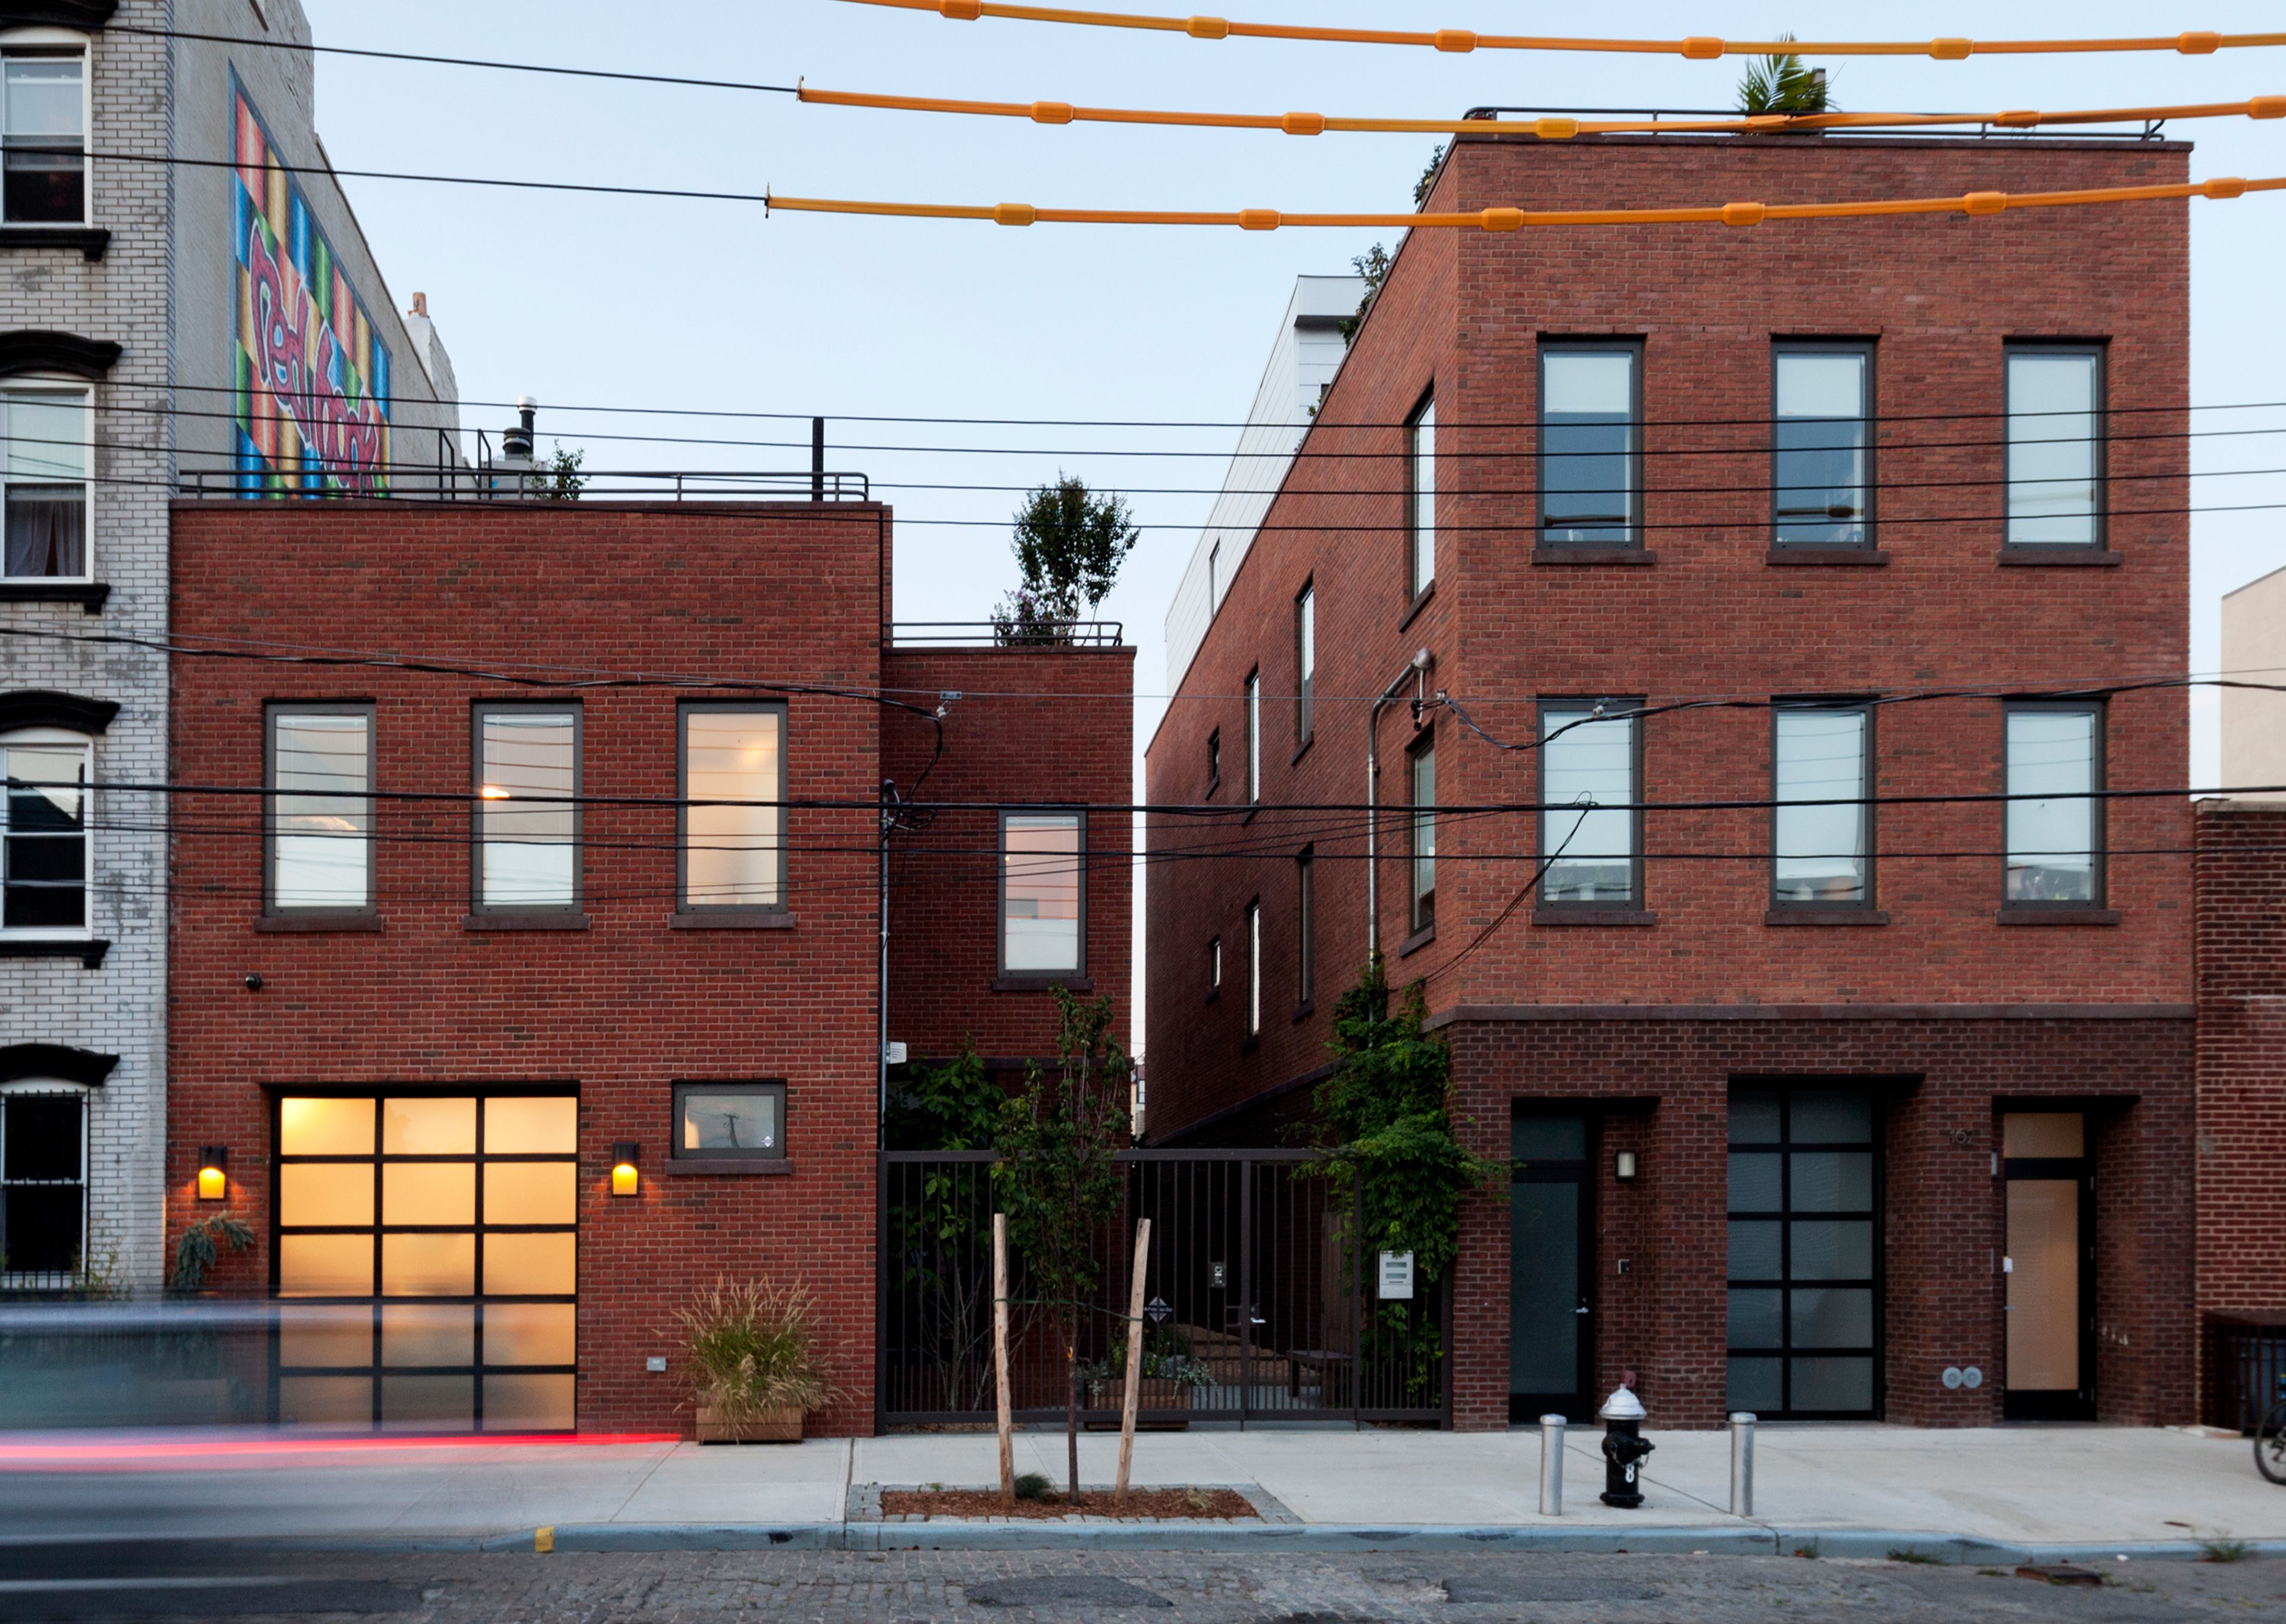 The Brooklyn Studio Greek Revival Rowhouse Extension